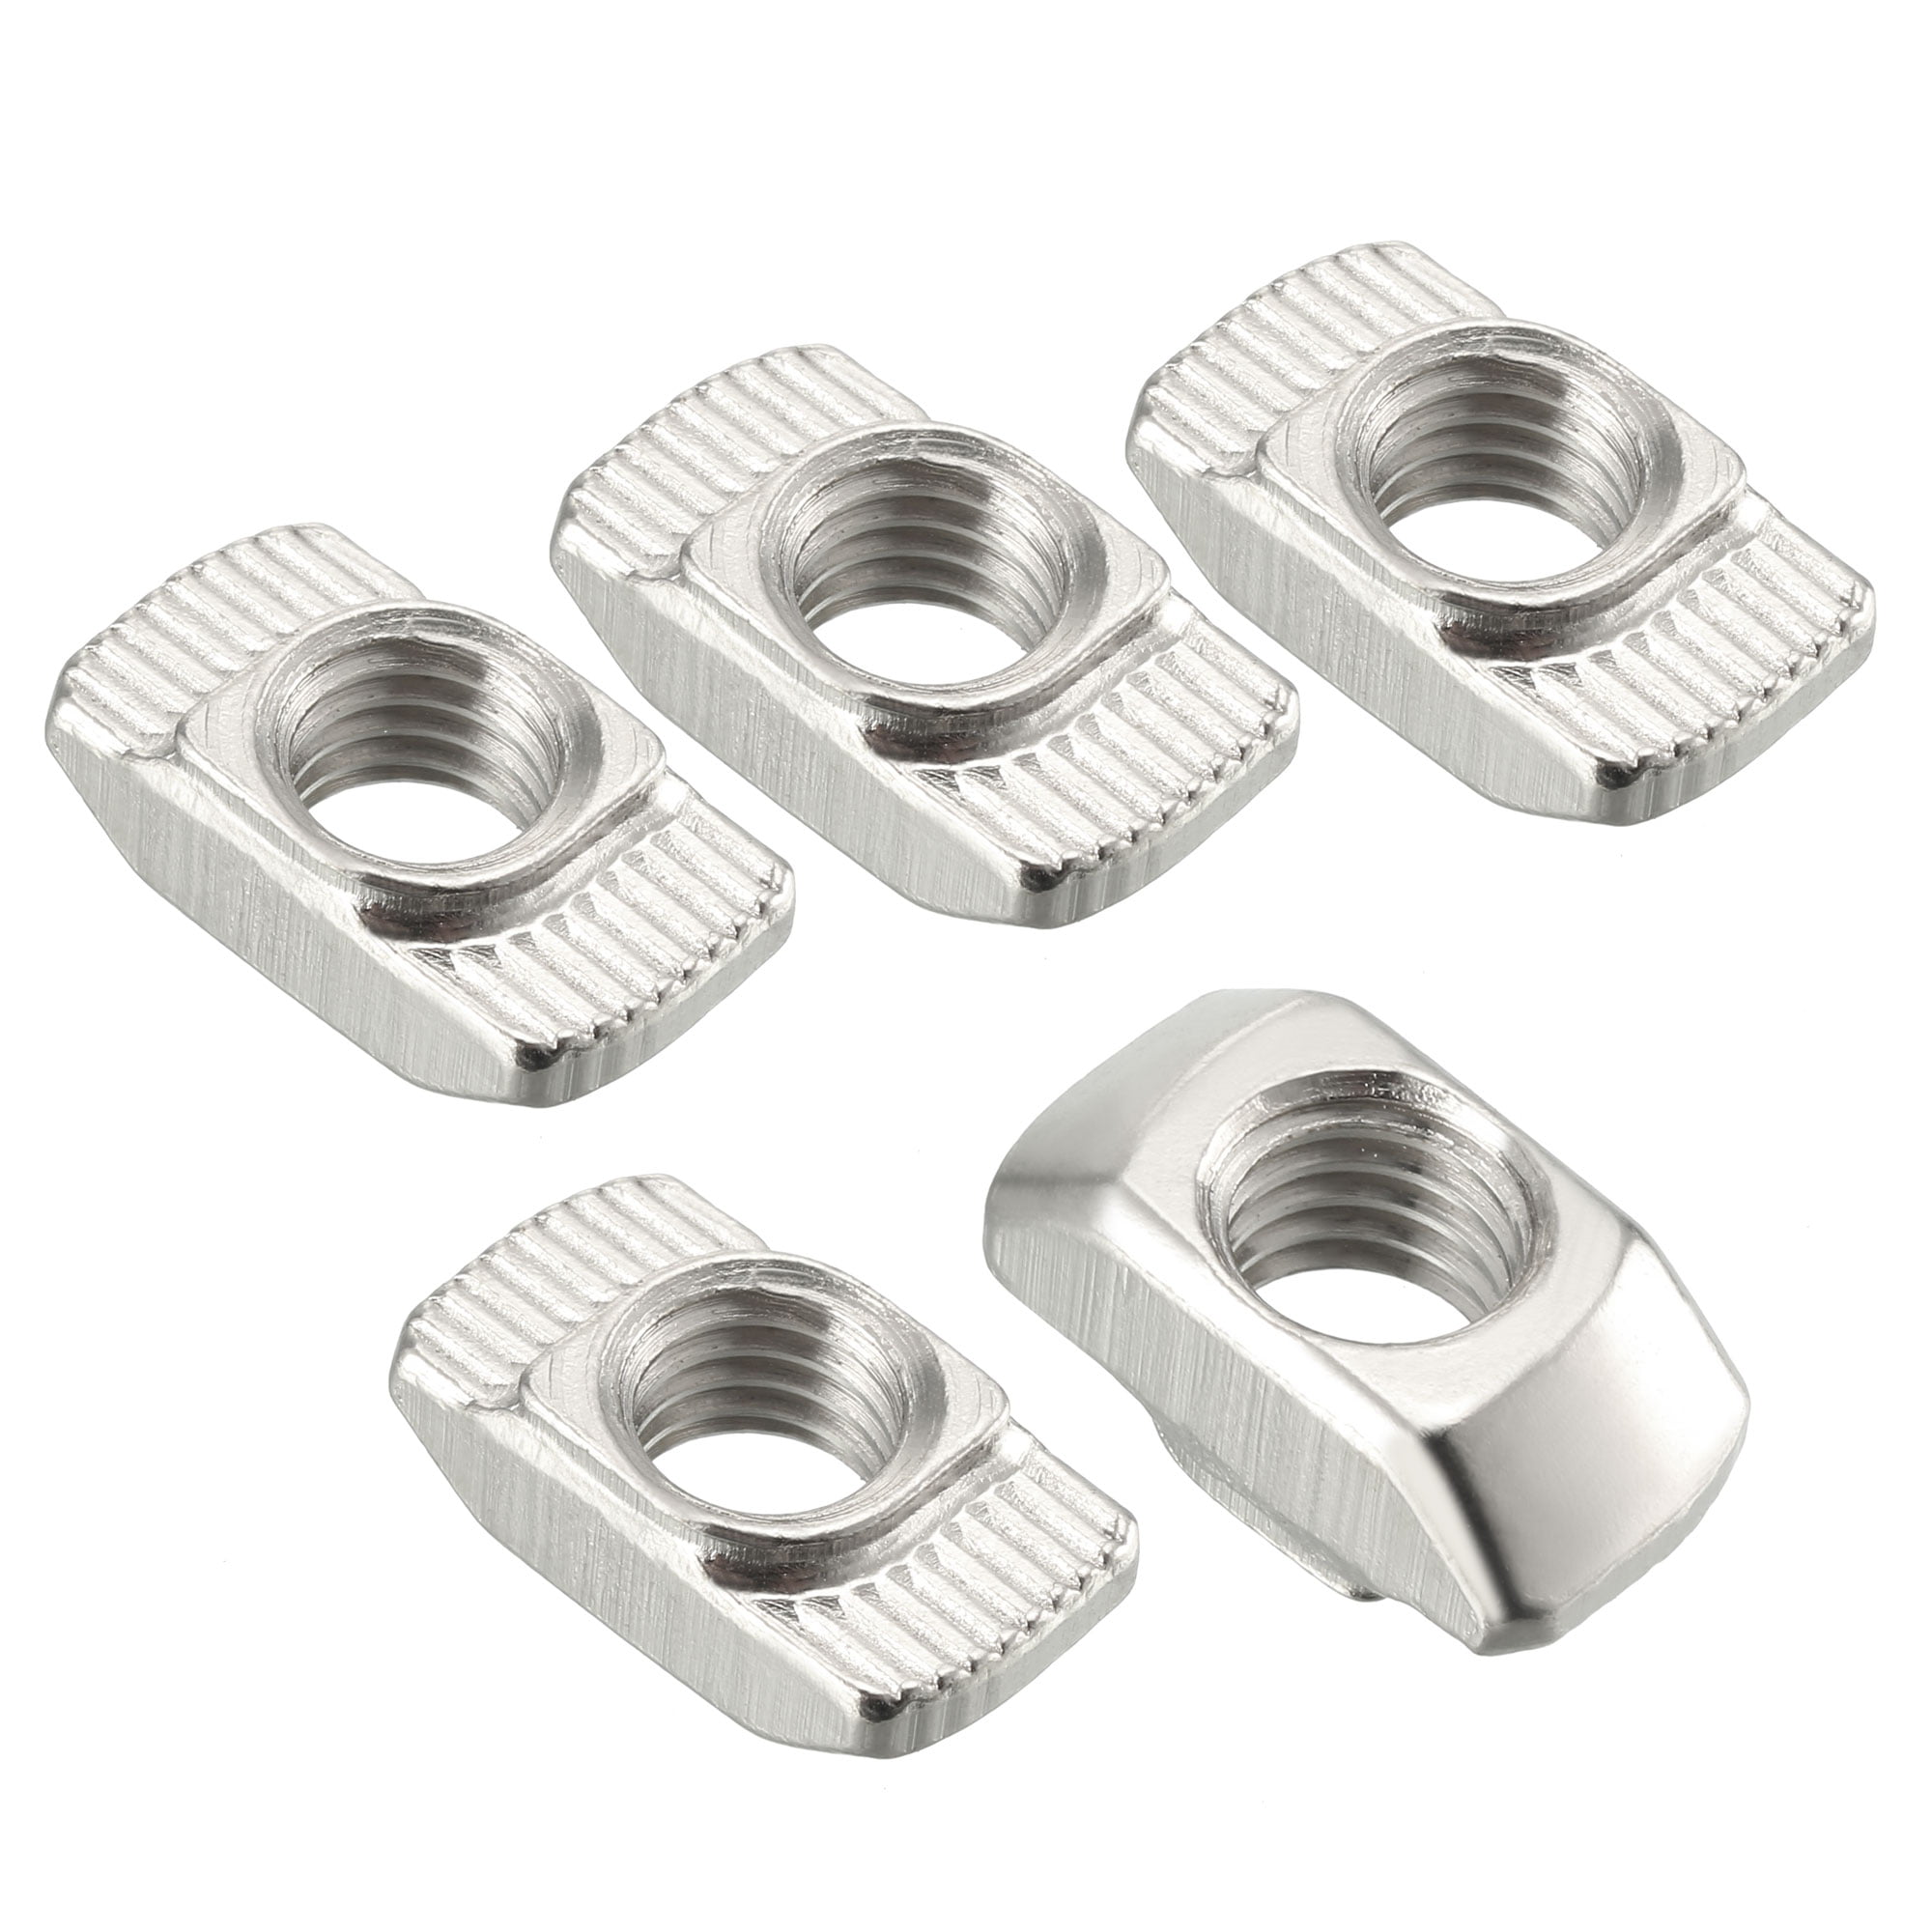 uxcell M12x1.25mm Retaining Four-Slot Slotted Round Nuts 4 Pcs 